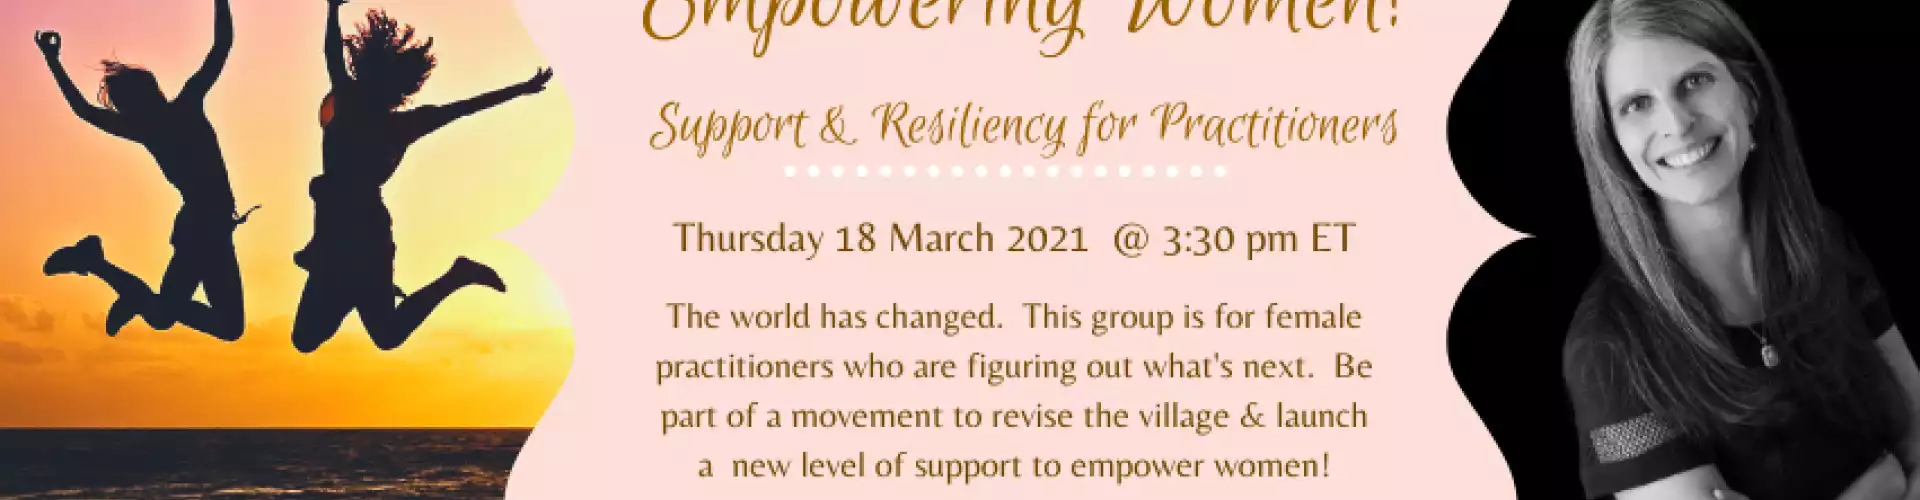 Empowering Women: Support & Resiliency for Practitioiners